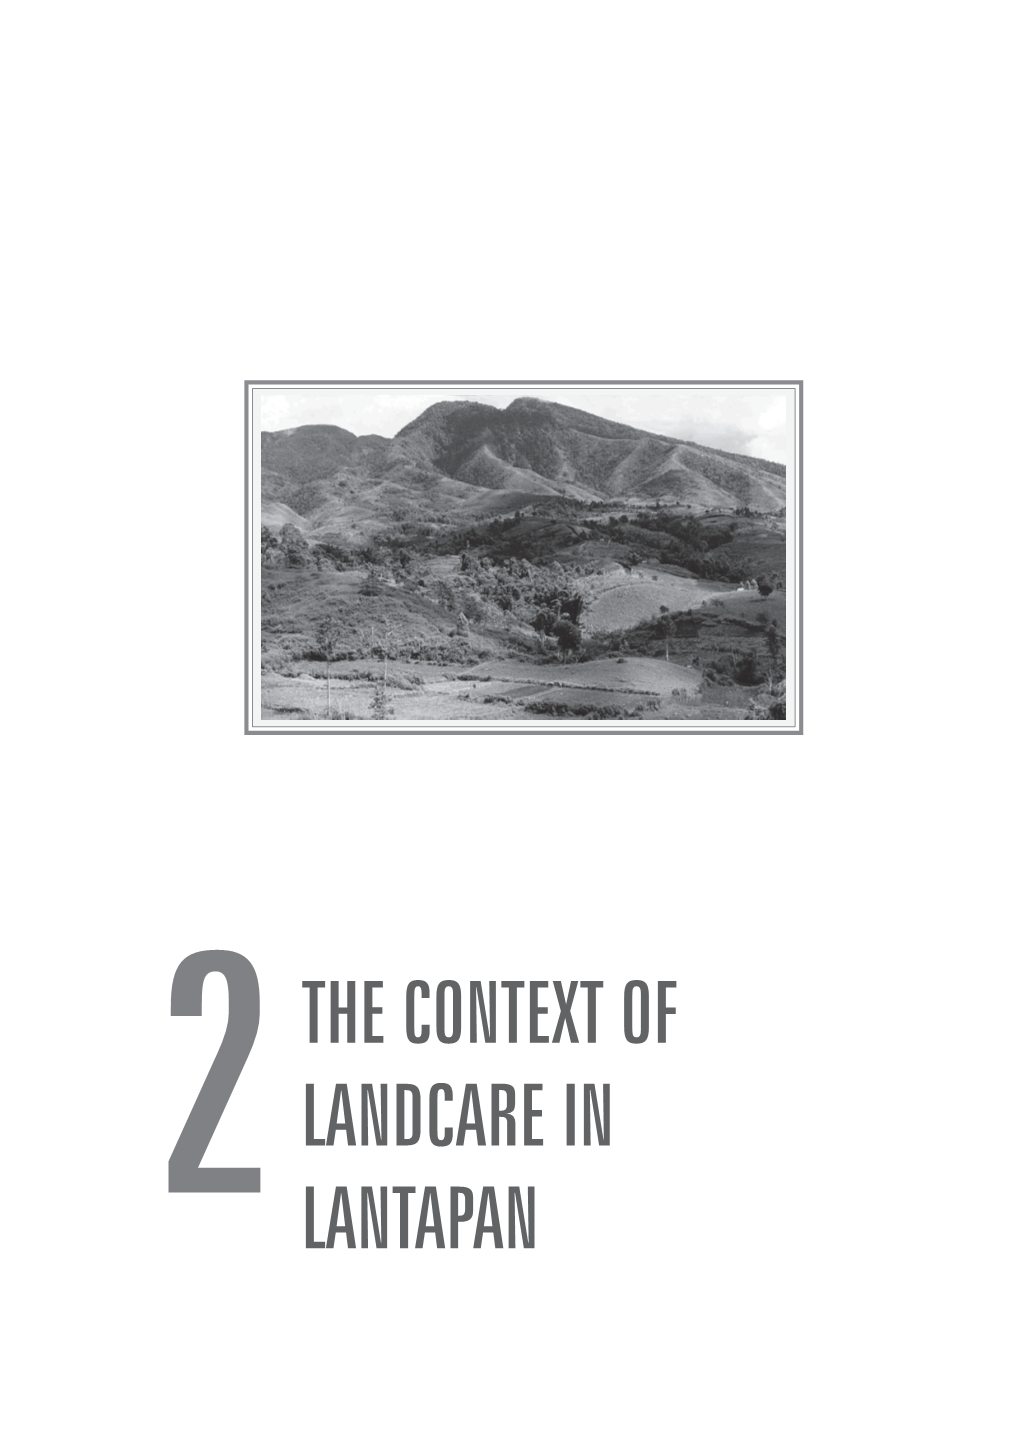 2The Context of Landcare in Lantapan